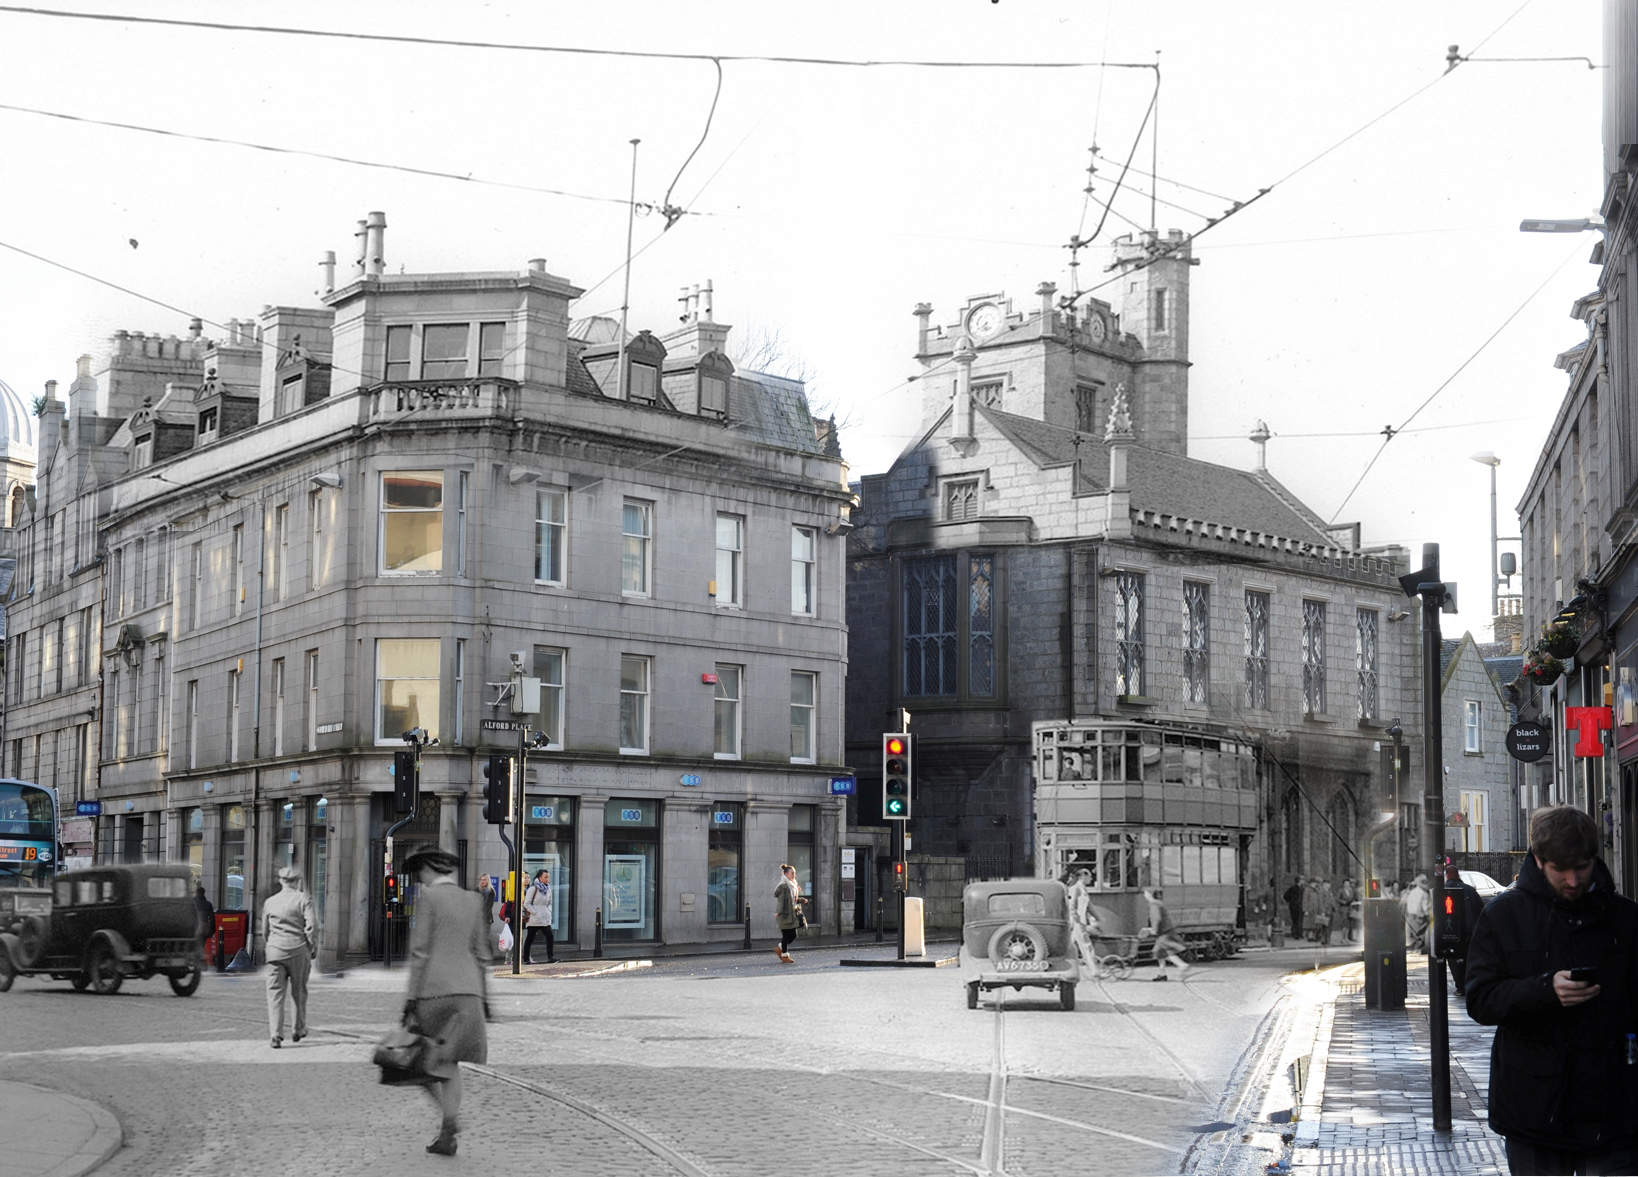 A montage of the images showing the changes to the street in years gone by